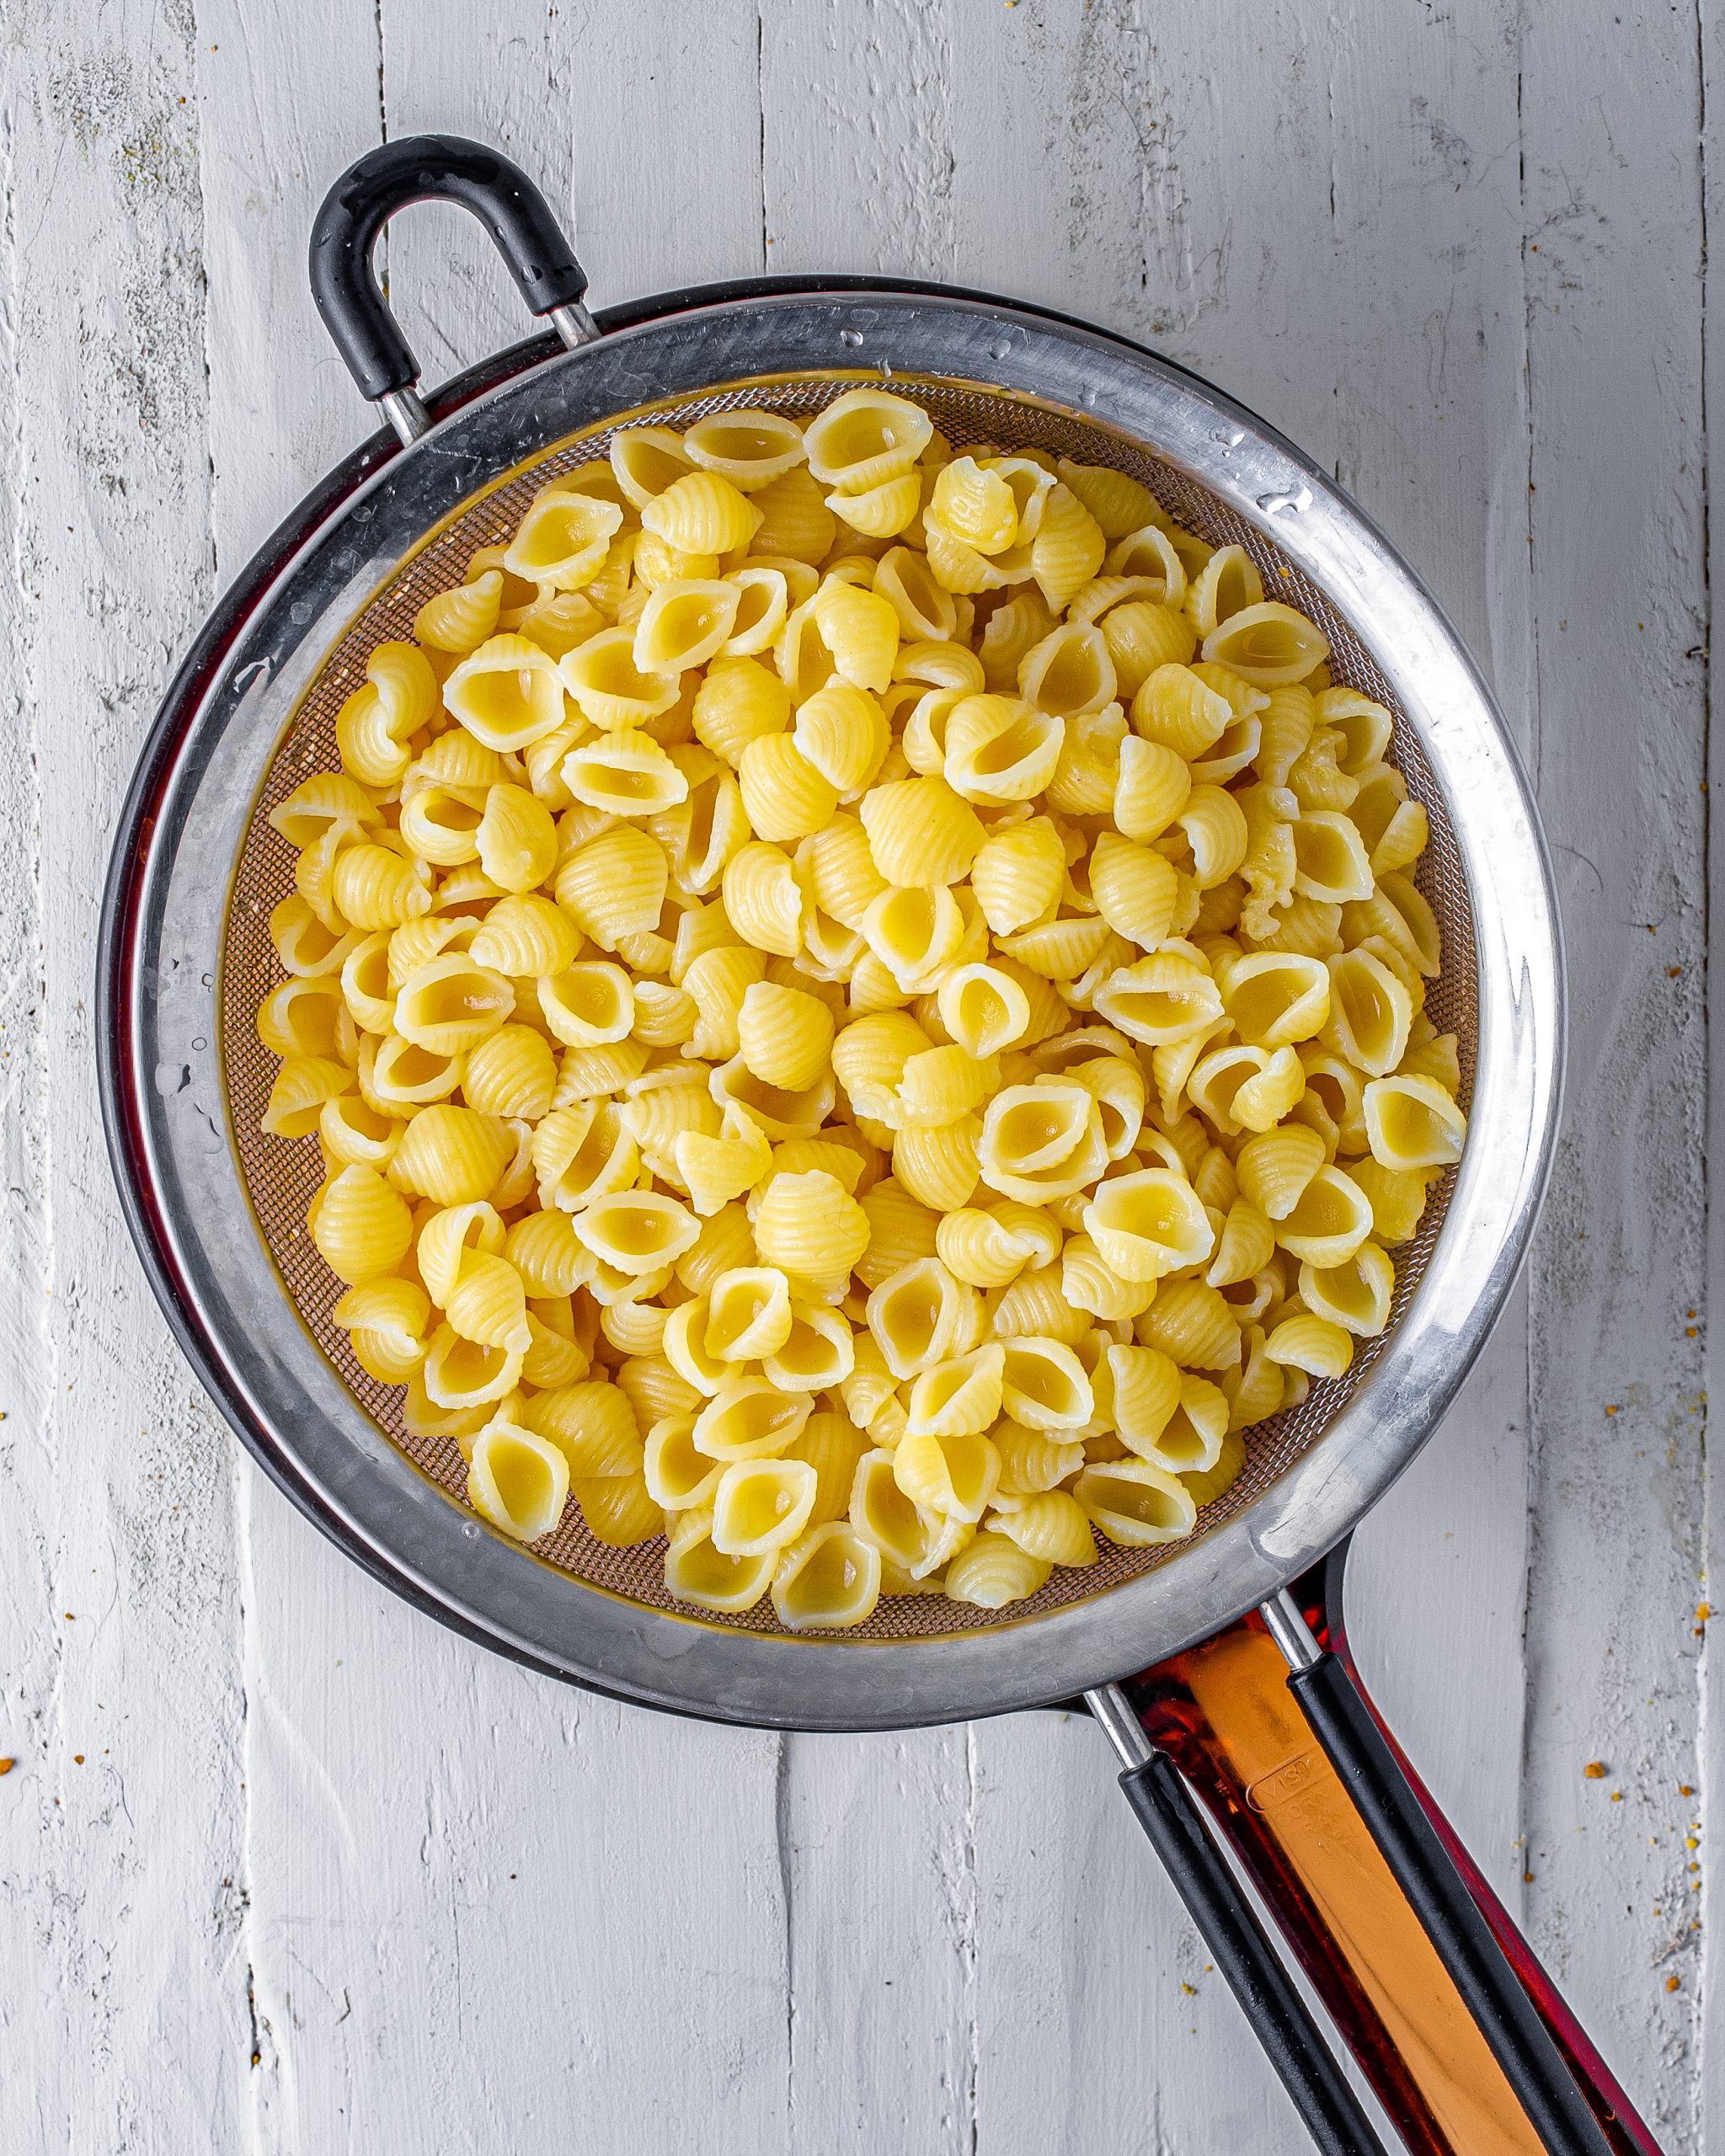 Add the pasta to boiling water, and cook until done to your liking. Rinse under cold water, and drain well. 